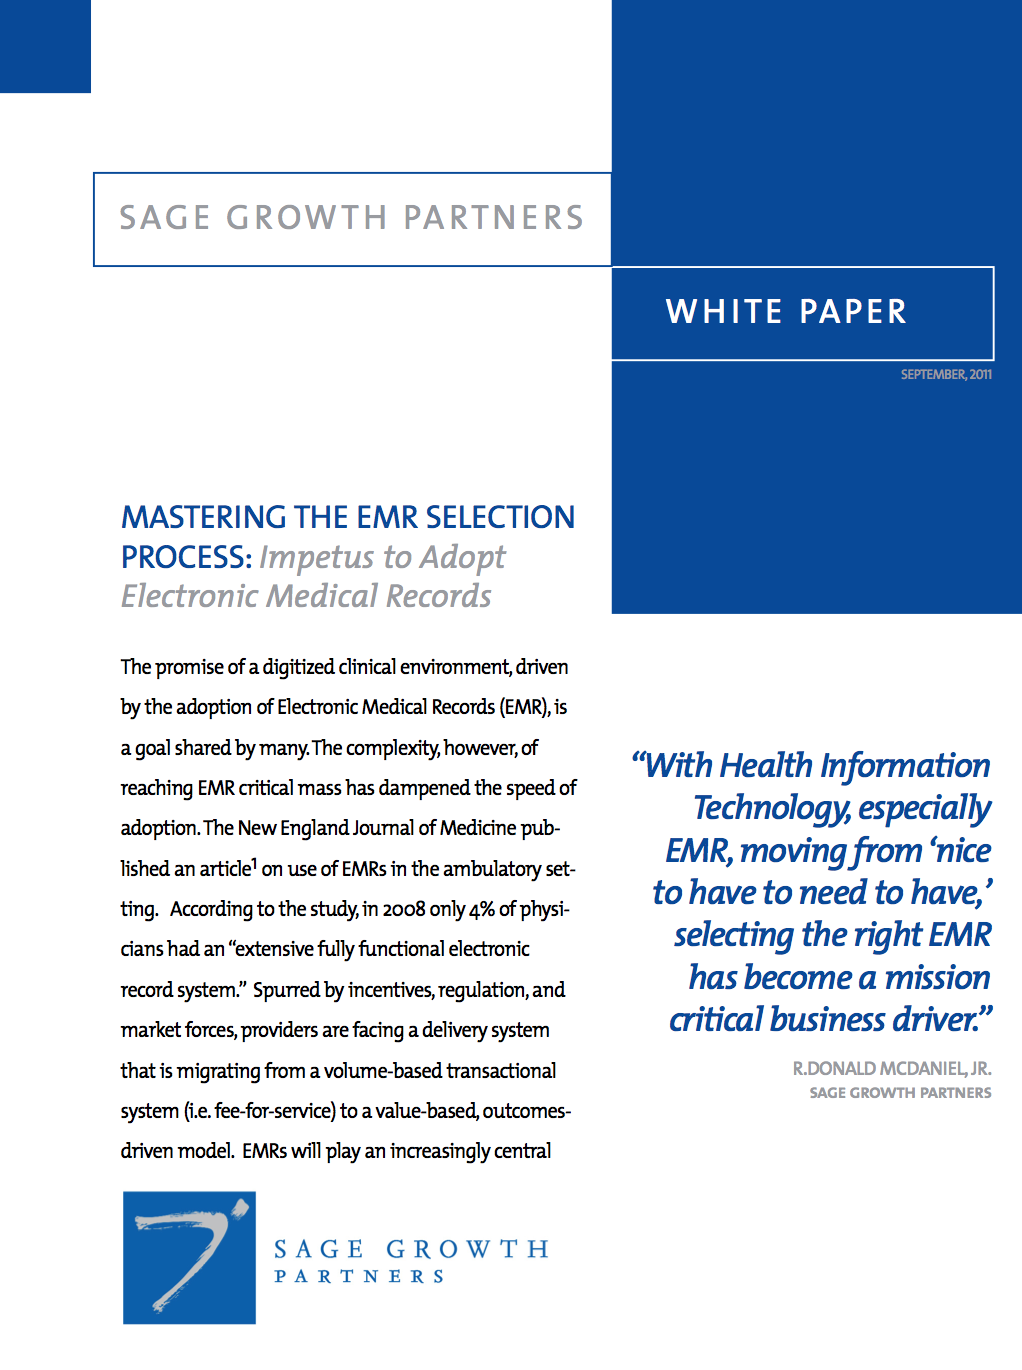 Mastering the EMR Selection Process: Impetus to Adopt Electronic Medical Records